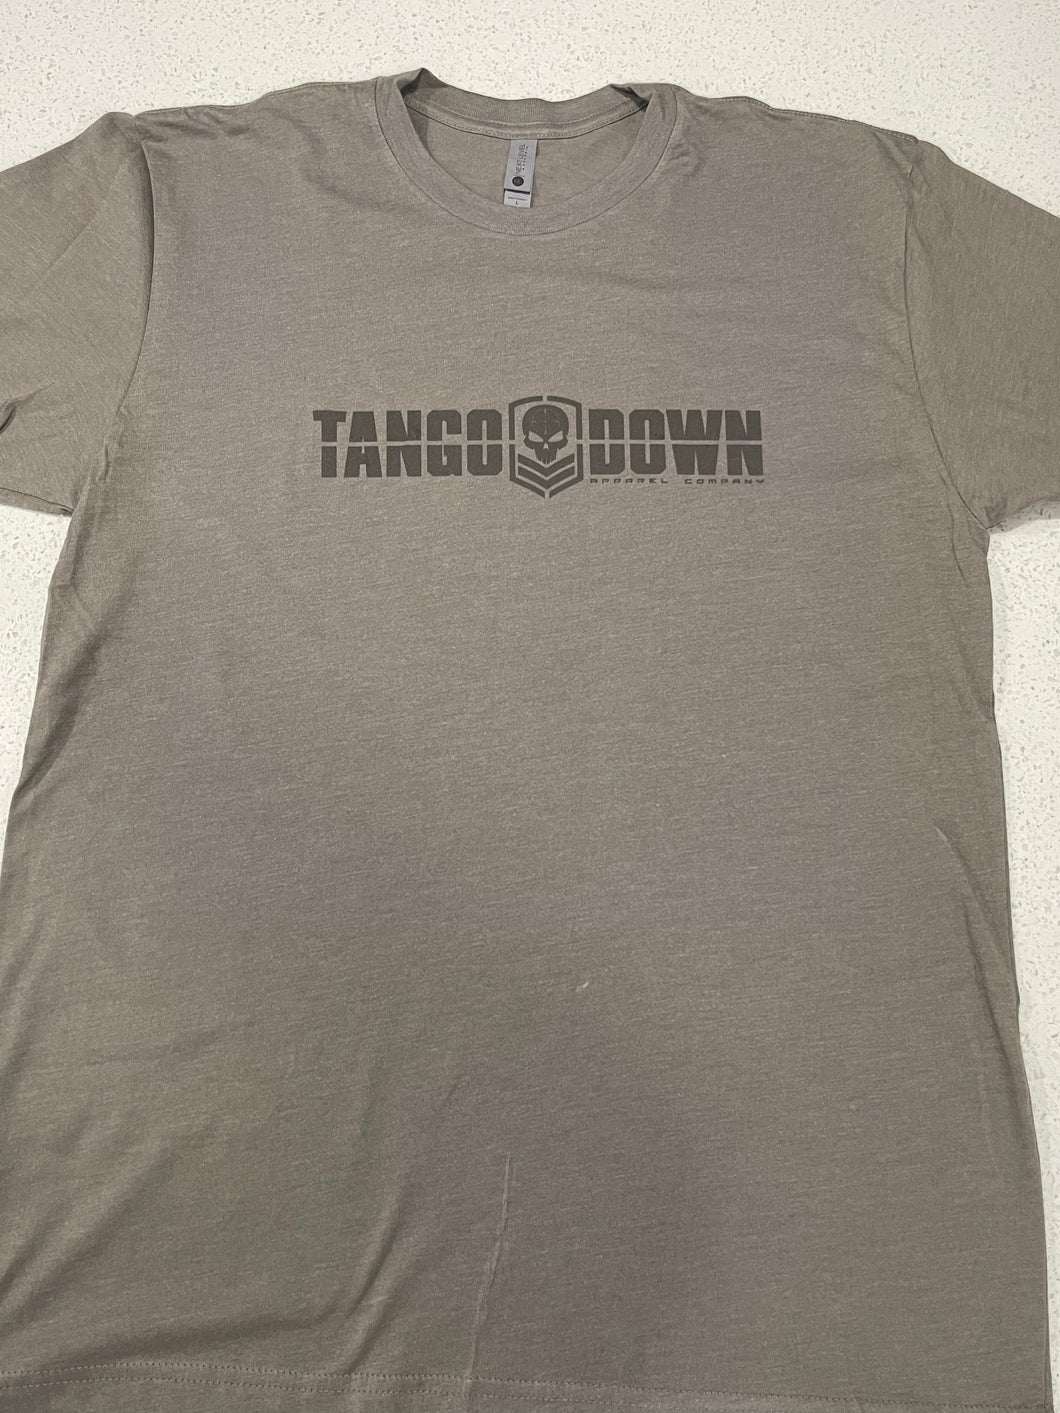 Tango Down T's Athletic Fit (Warm Grey)